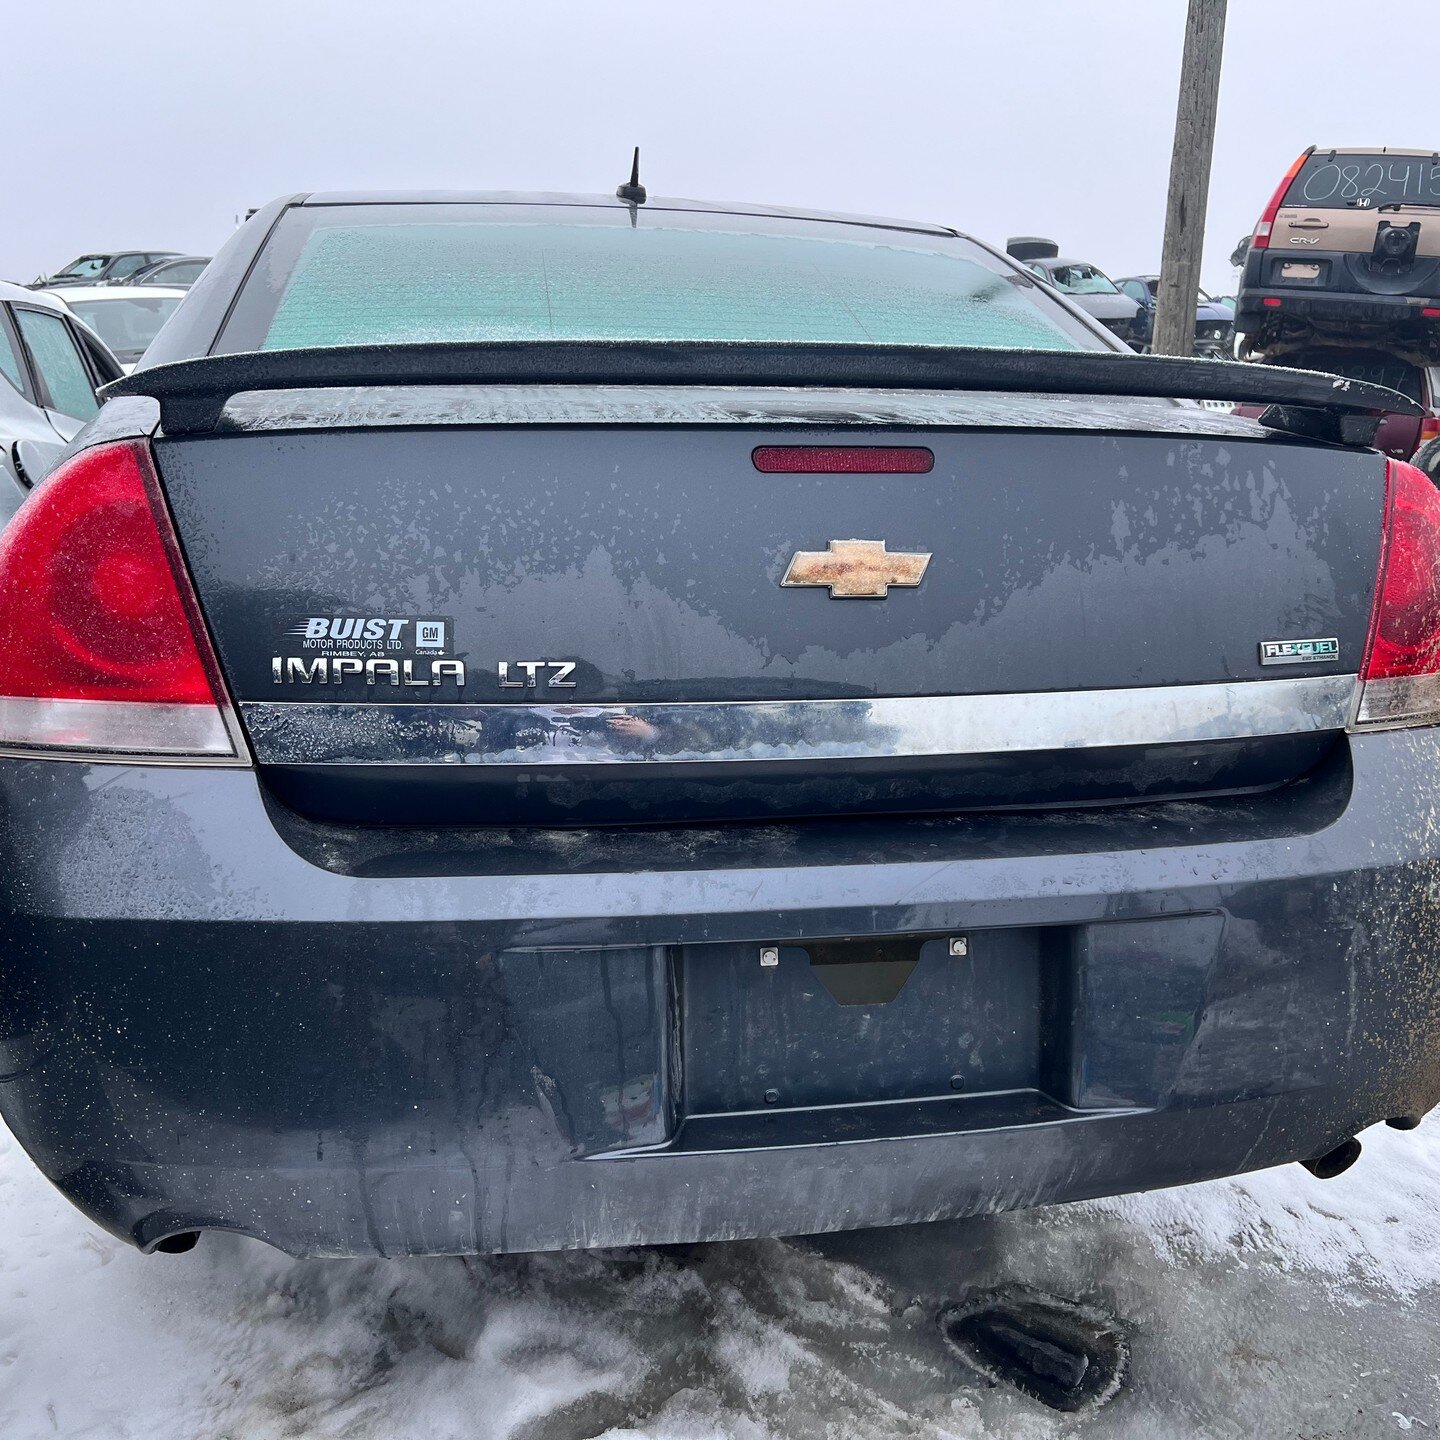 2011 CHEVY IMPALA 3.9L *FOR PARTS* - FWD, 4 SPEED AUTOMATIC TRANSMISSION, FLEX FUEL, 6 CYCLINDER , GREY (WA637R) KMS:999, VIN:2G1WC5EM1B1107987

We offer contactless delivery and are more than willing to accommodate your needs.
Why pick your part whe